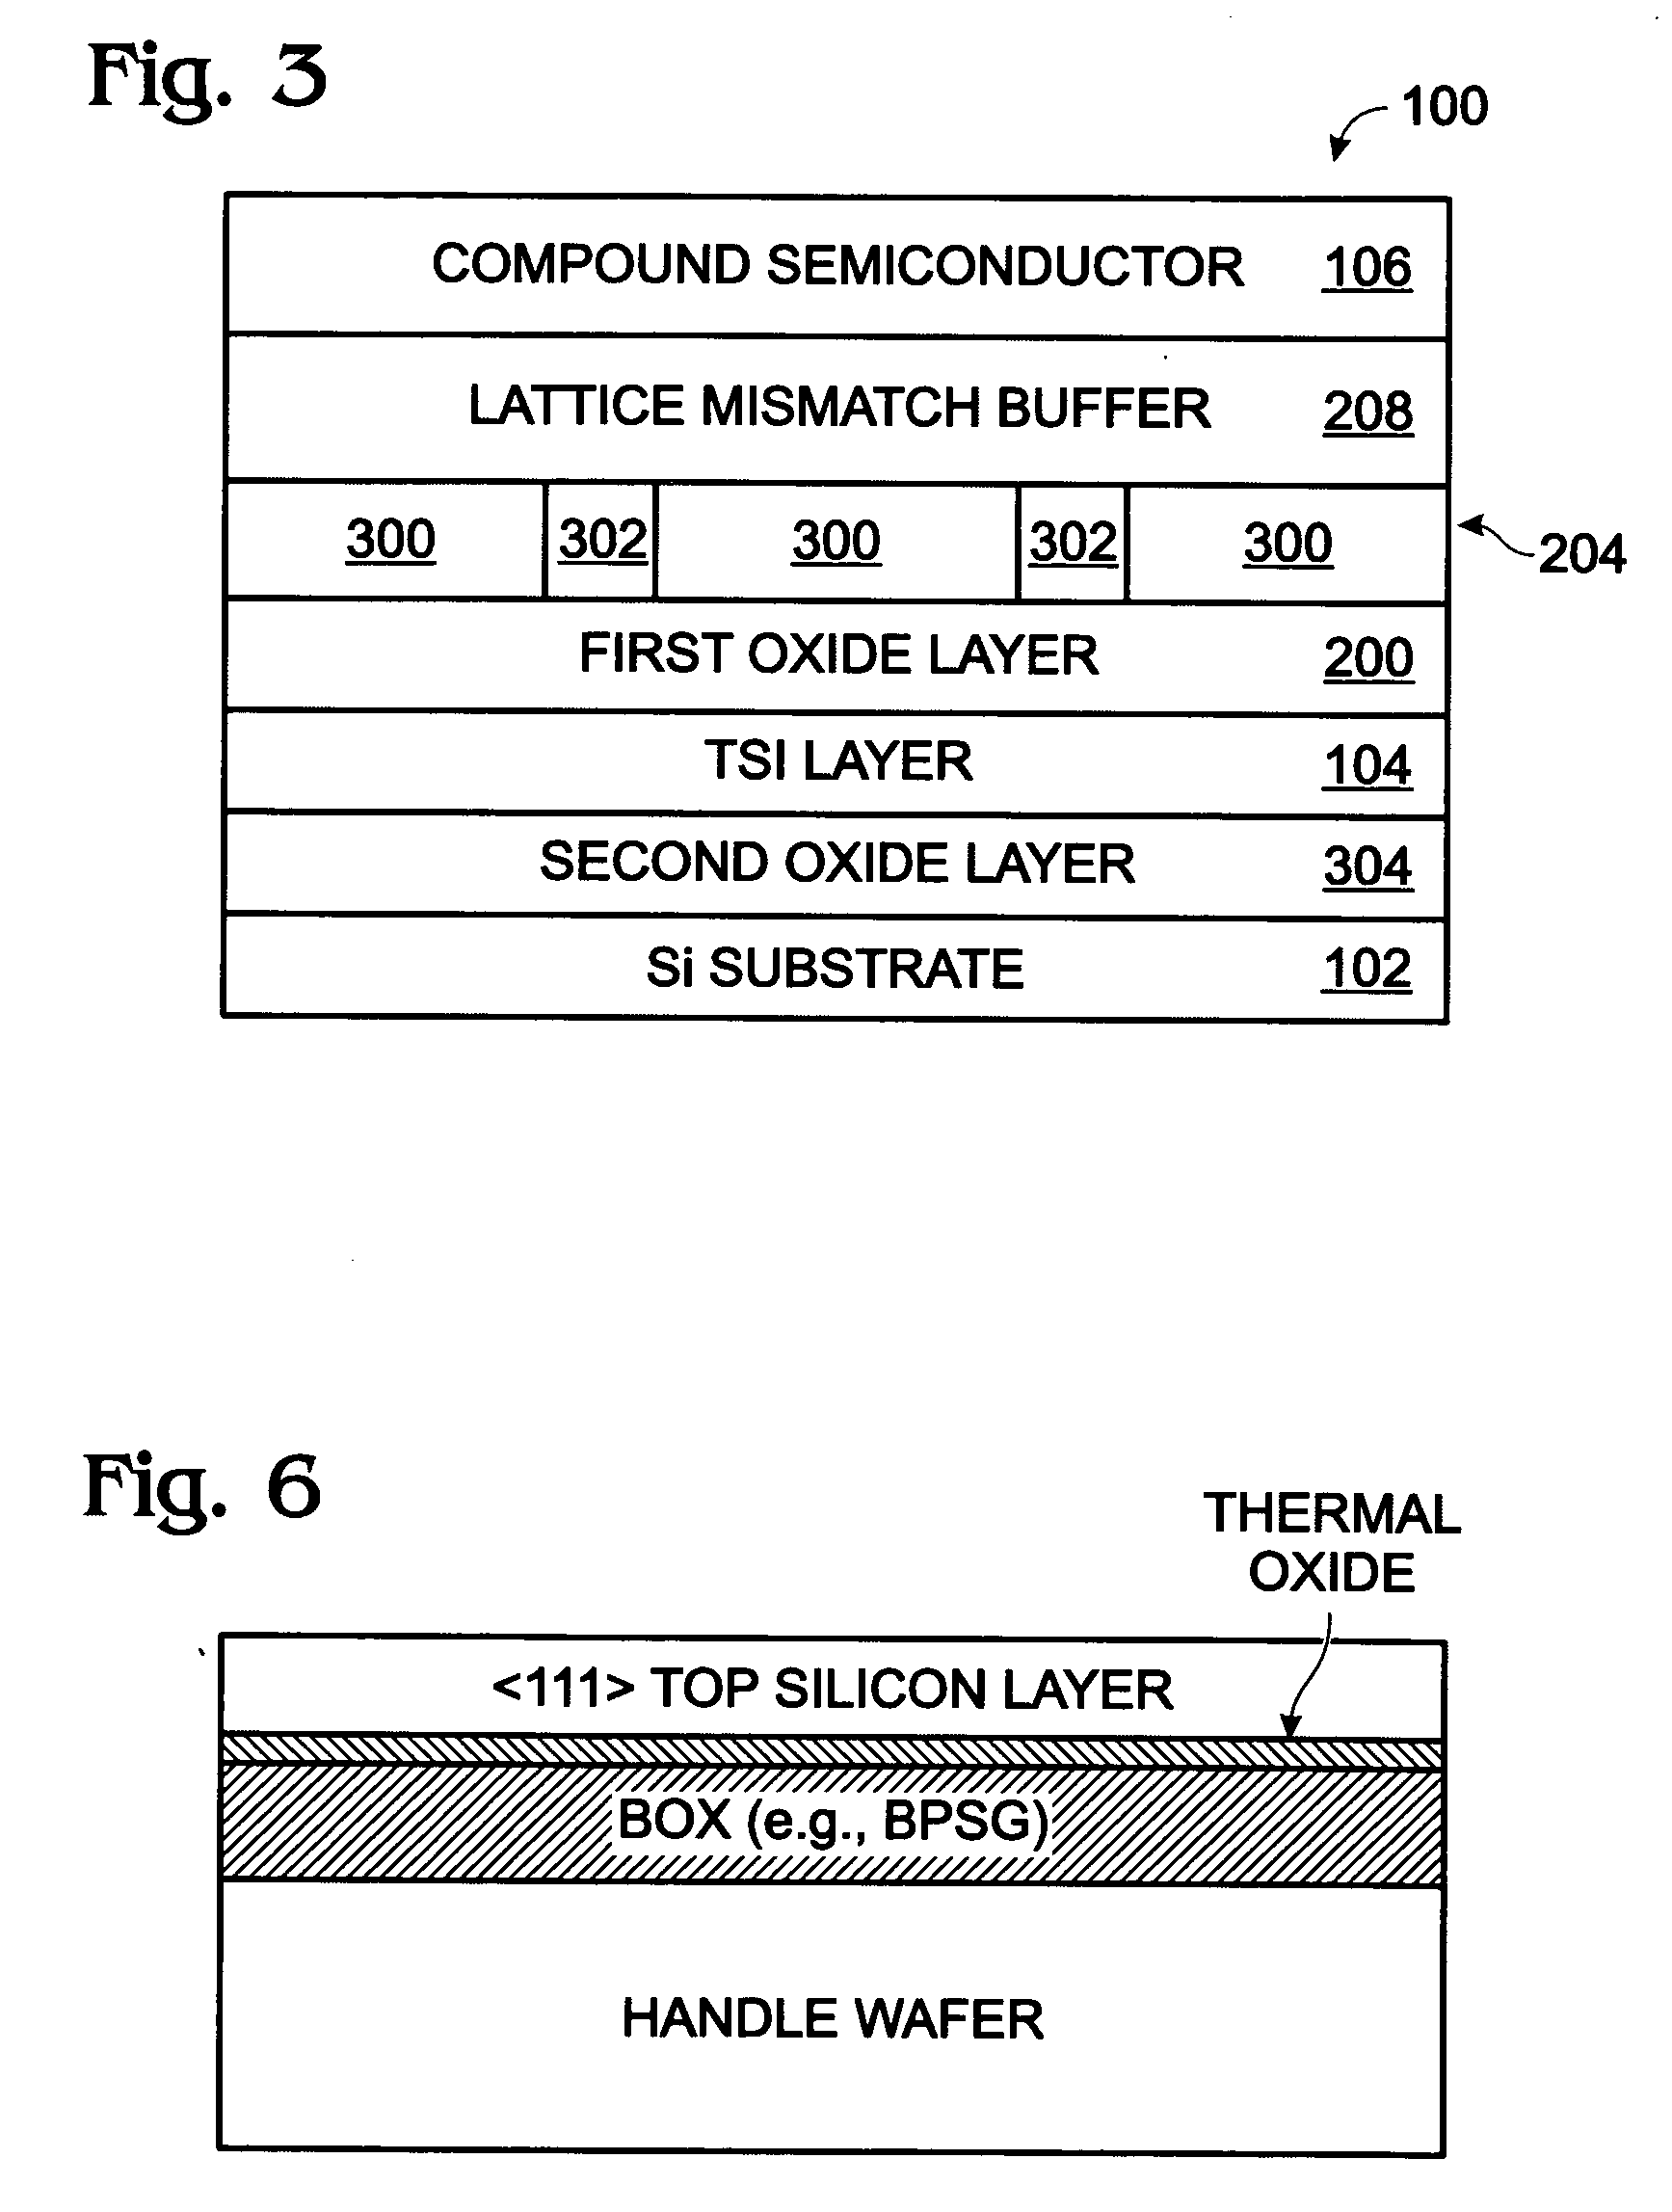 Compound semiconductor-on-silicon wafer with a thermally soft insulator